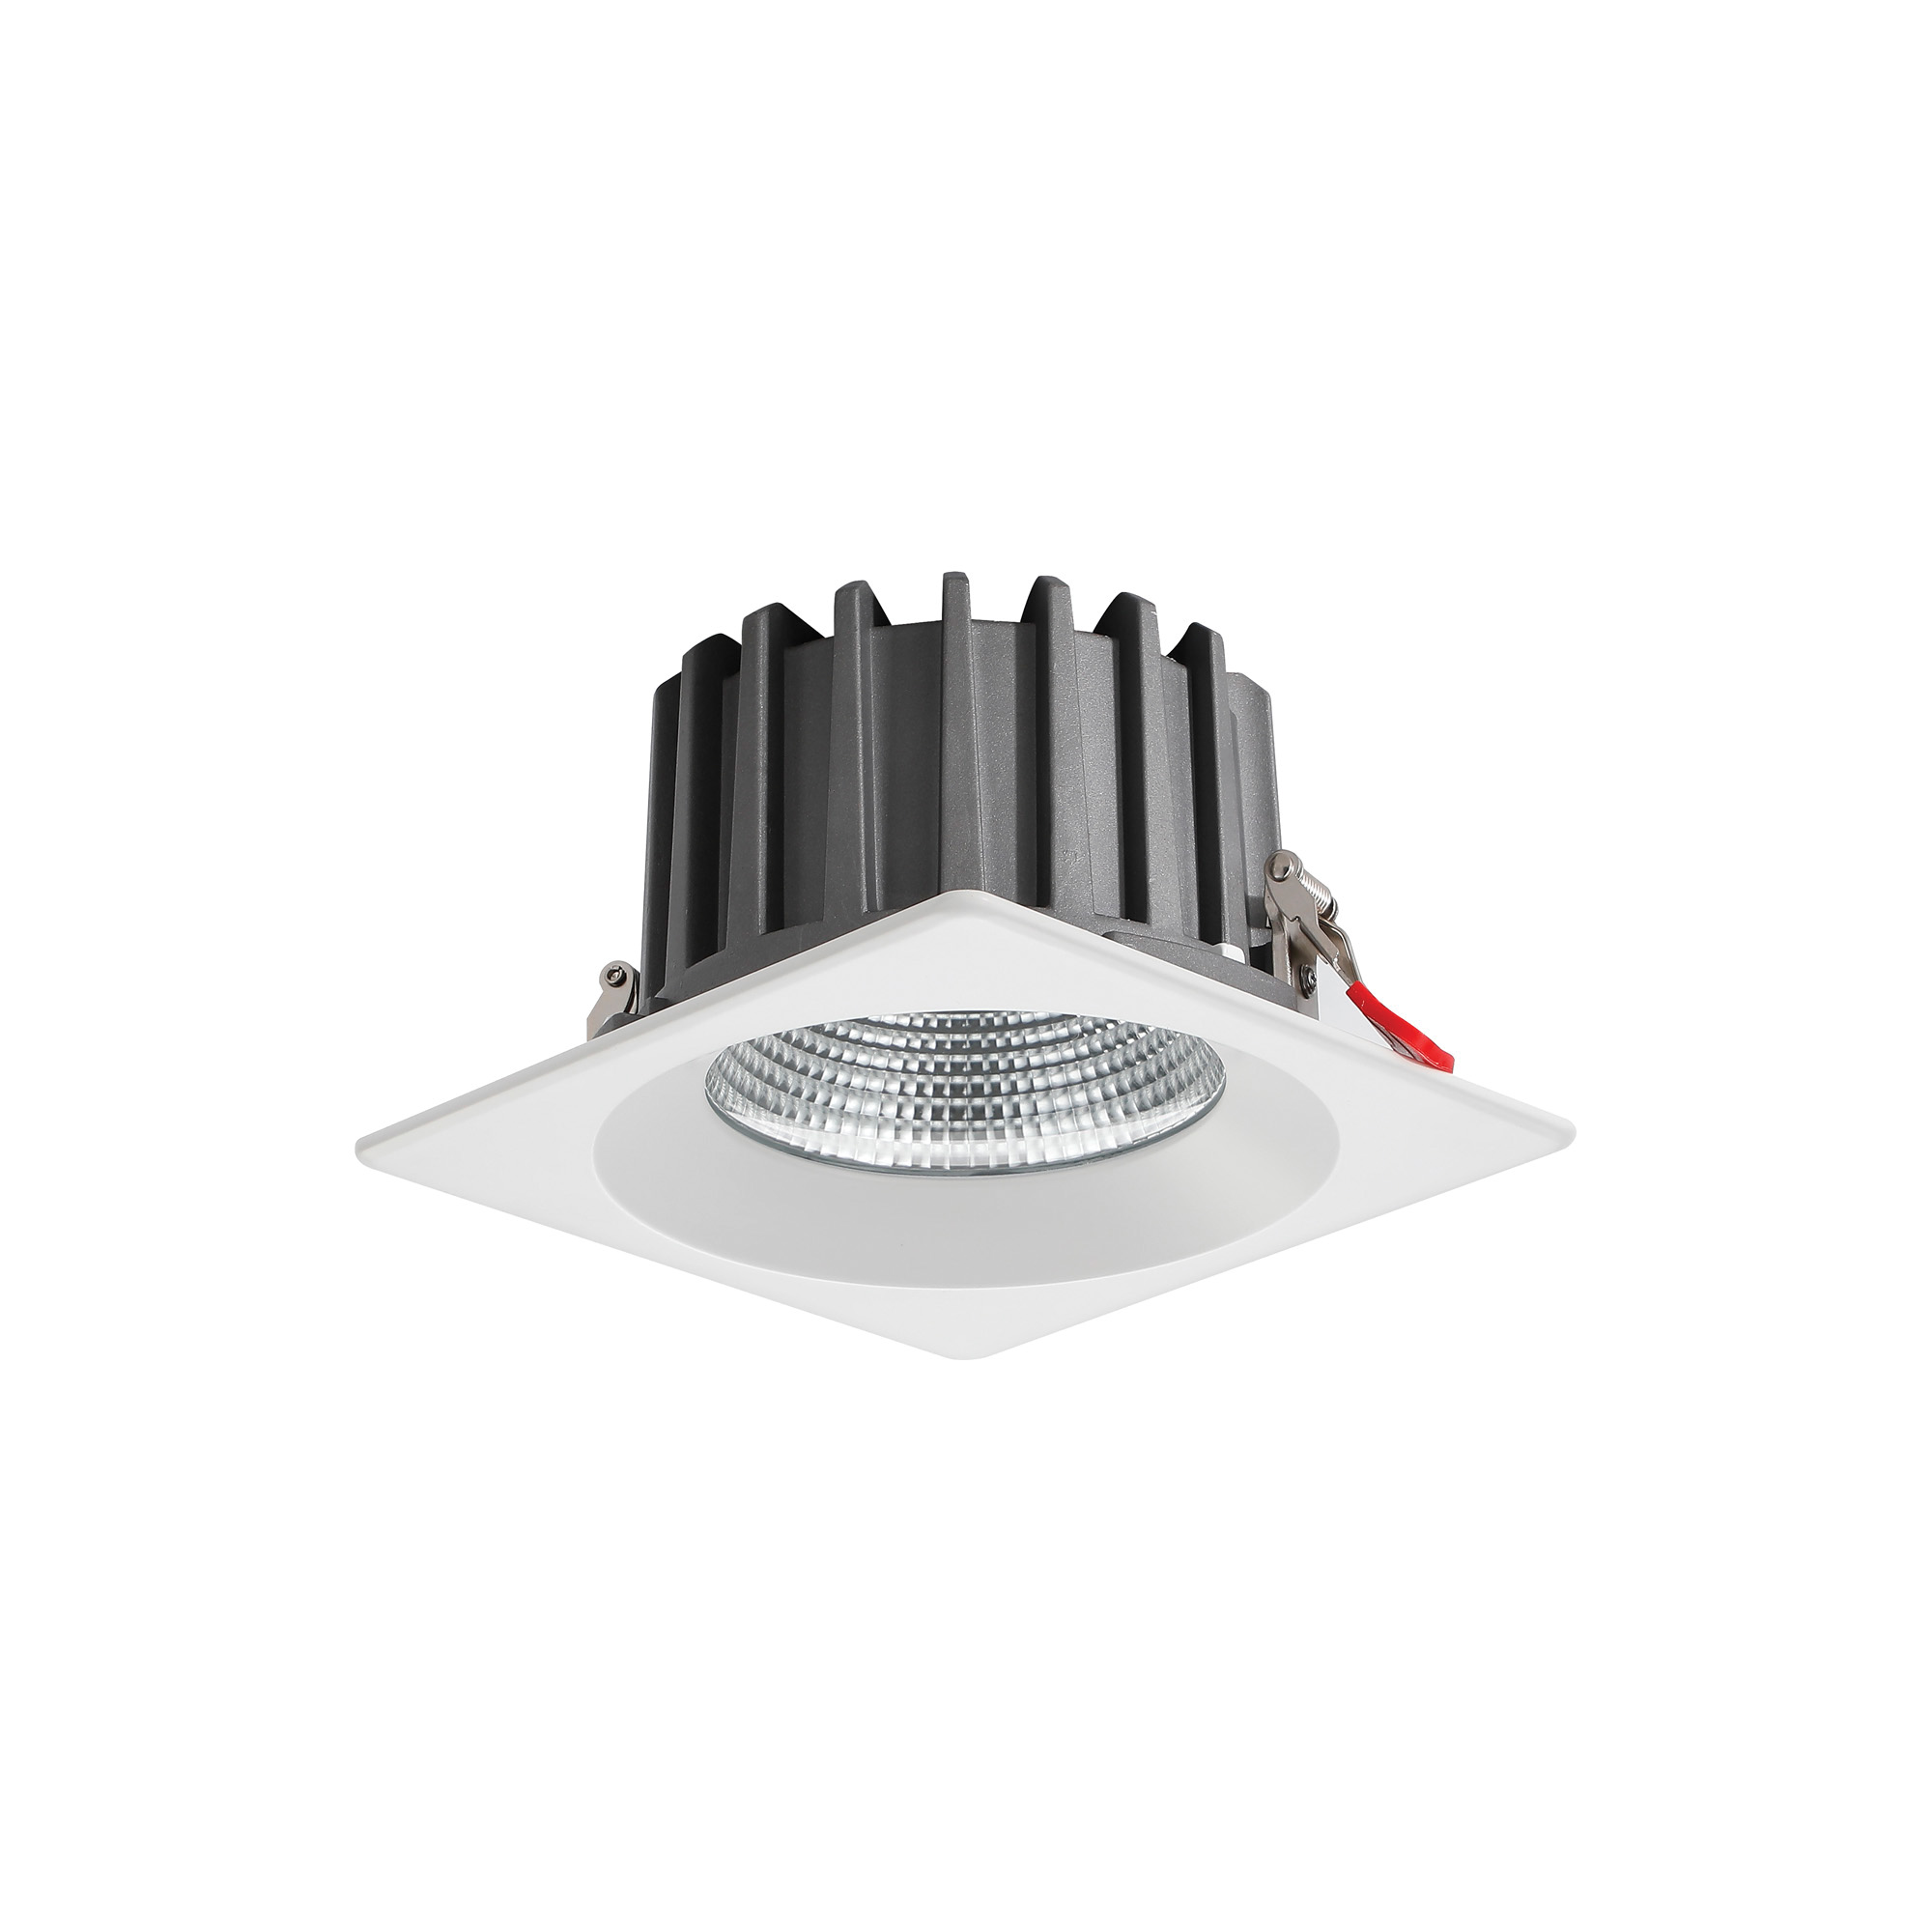 DL200075  Bionic 24, 24W, 700mA, White Deep Square Recessed Downlight, 2040lm ,Cut Out 155mm, 42° , 5000K, IP44, DRIVER INC., 5yrs Warranty.